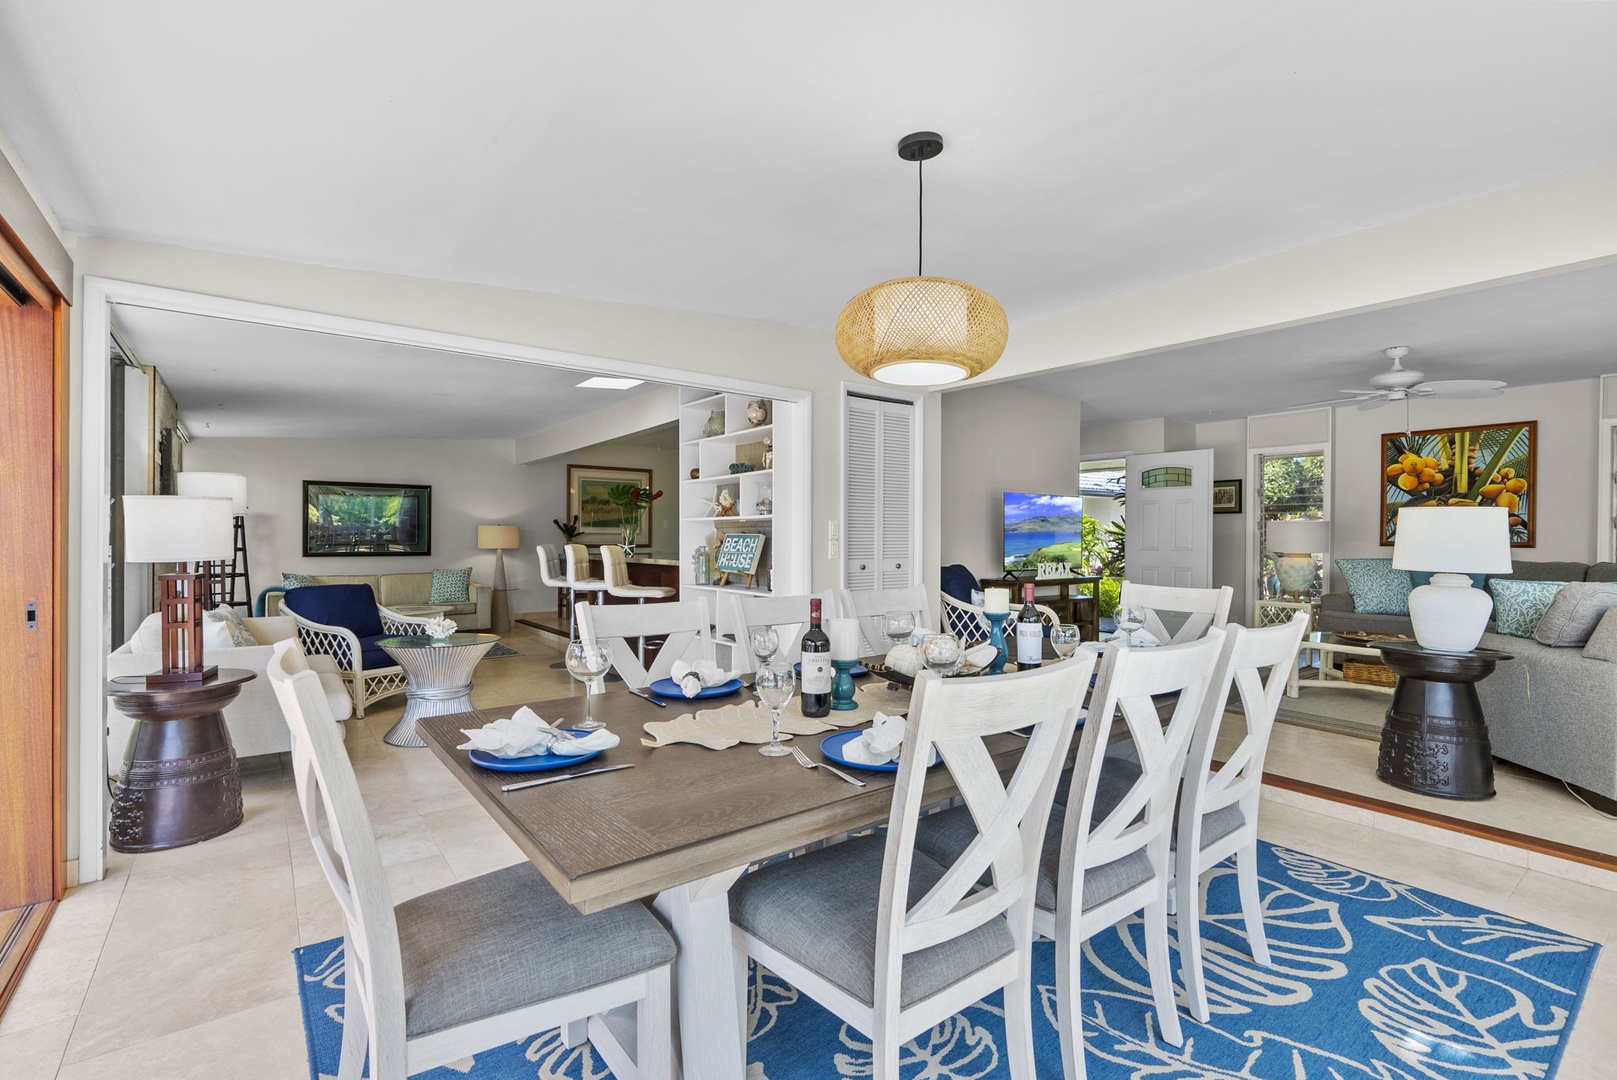 Kailua Vacation Rentals, Hale Aloha - Elegant dining setup ready to host eight, for memorable meals and conversations.